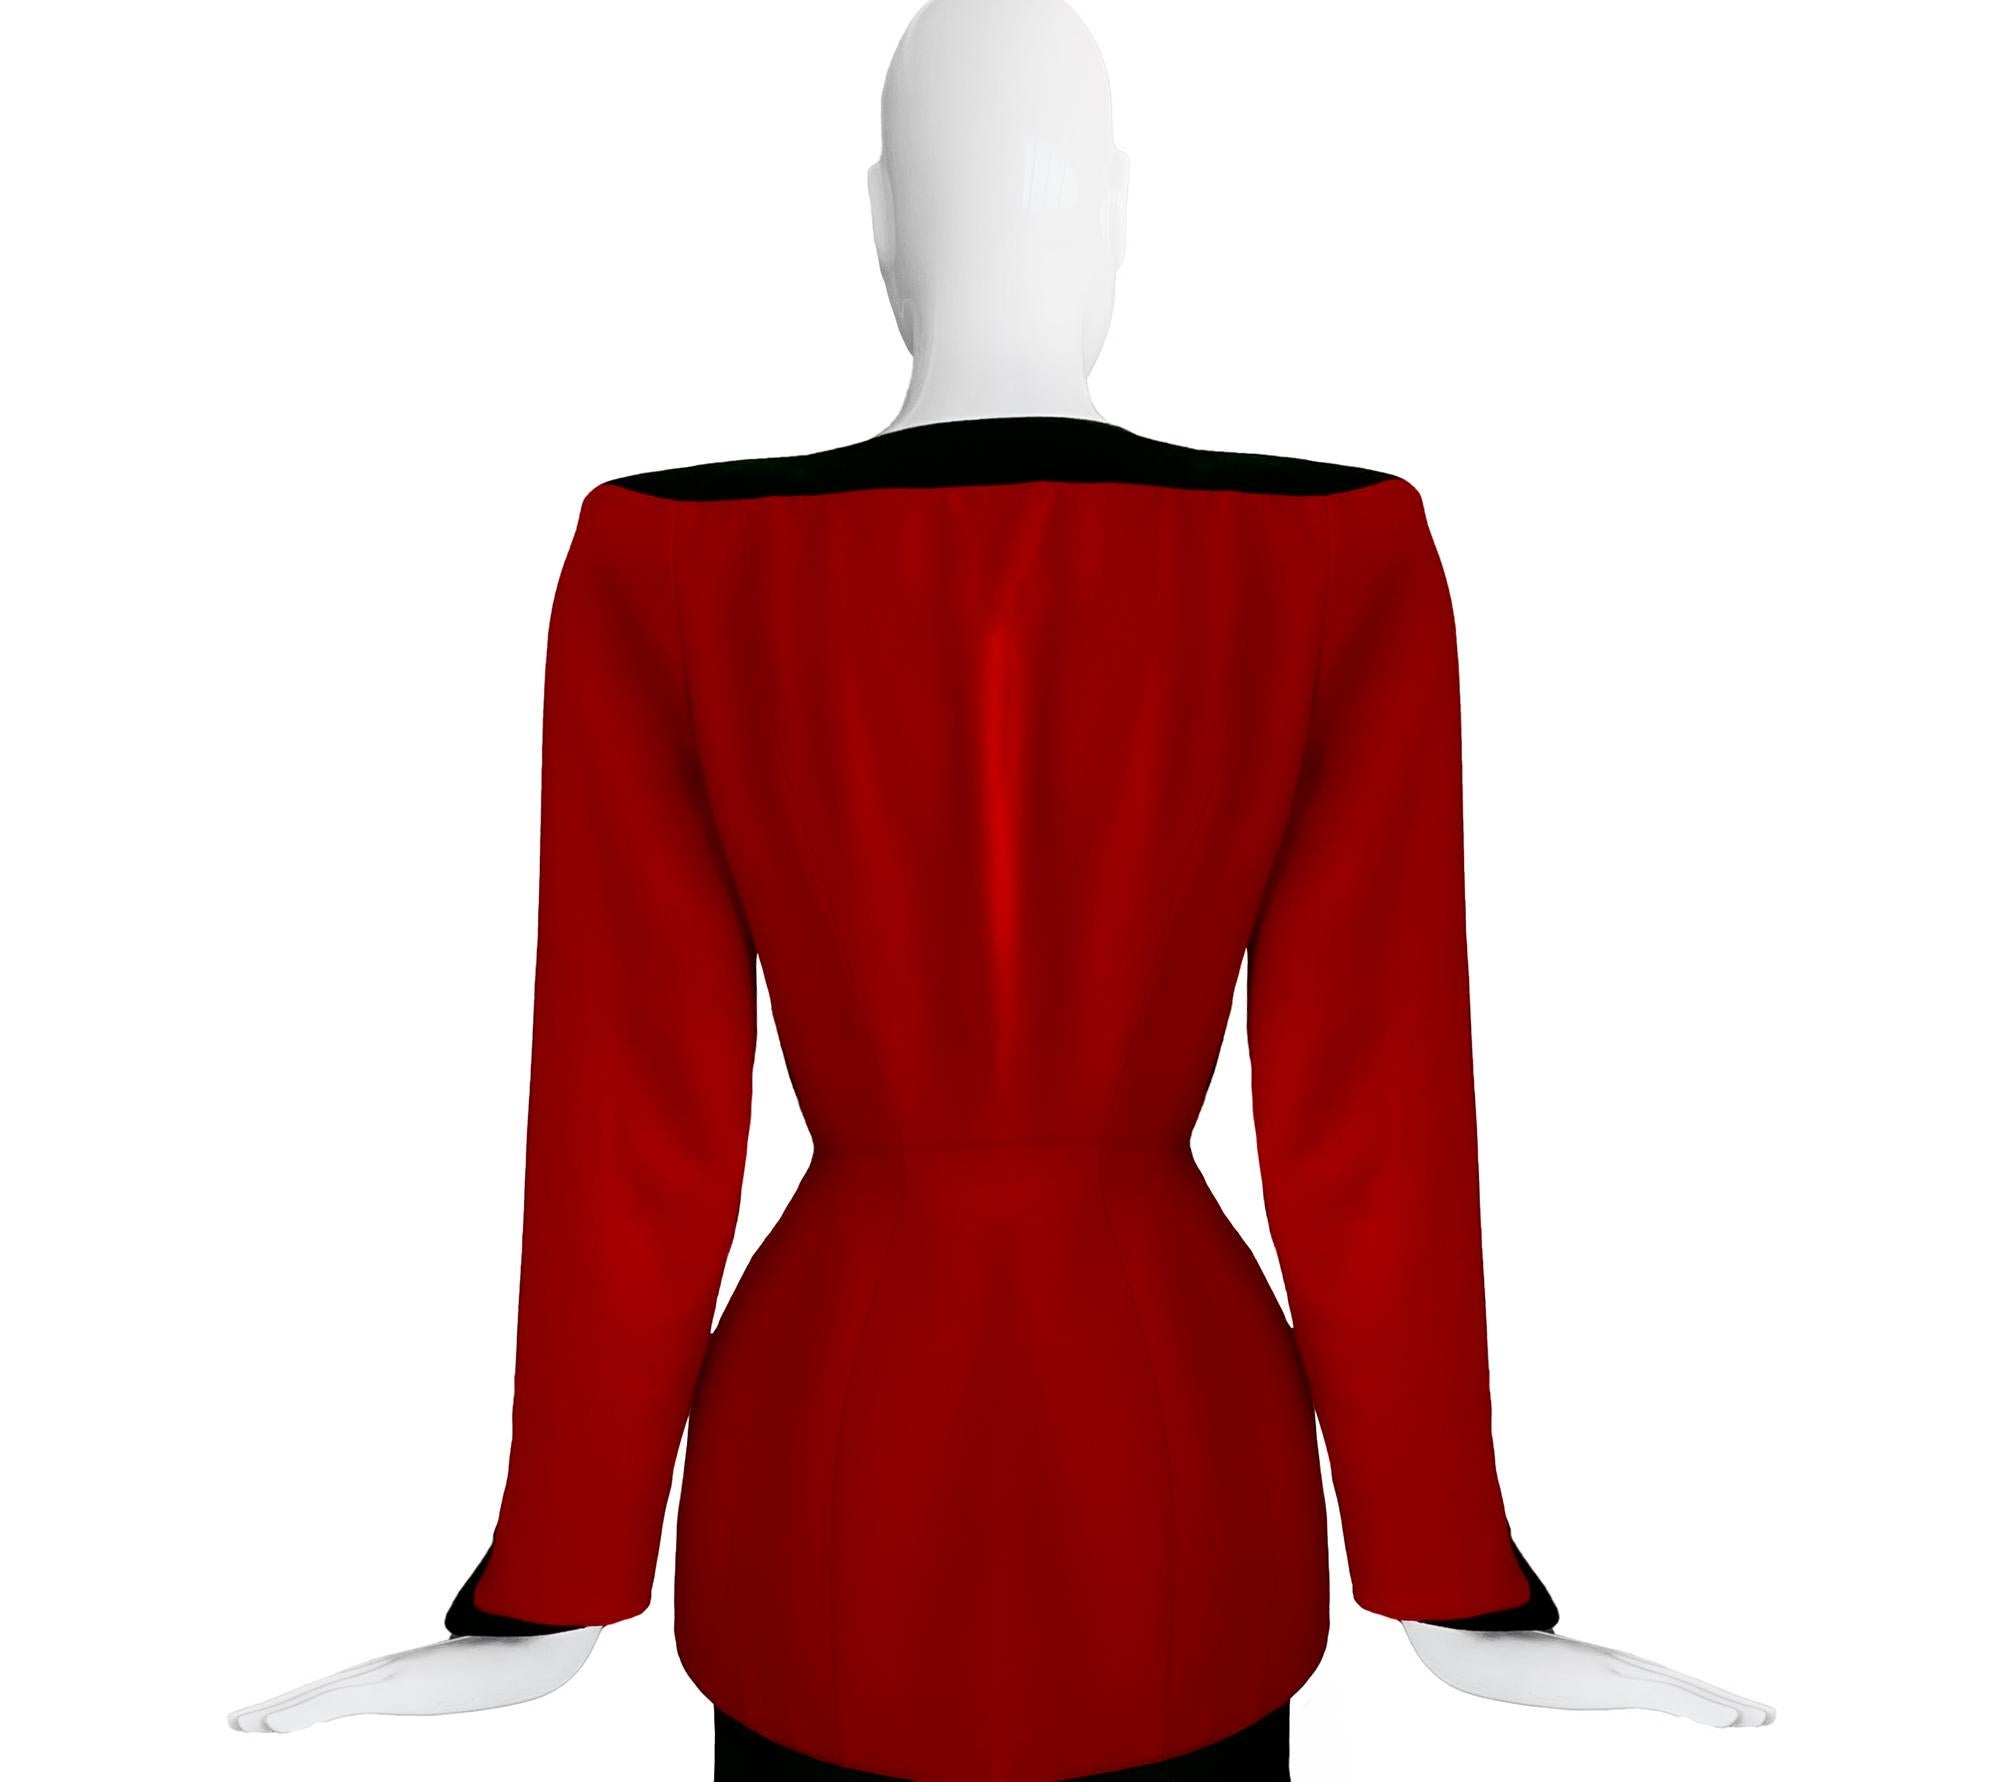 Thierry Mugler FW 1998/99 Suit Dramatic Deep V-Neck Jacket and Skirt Red Black  For Sale 2